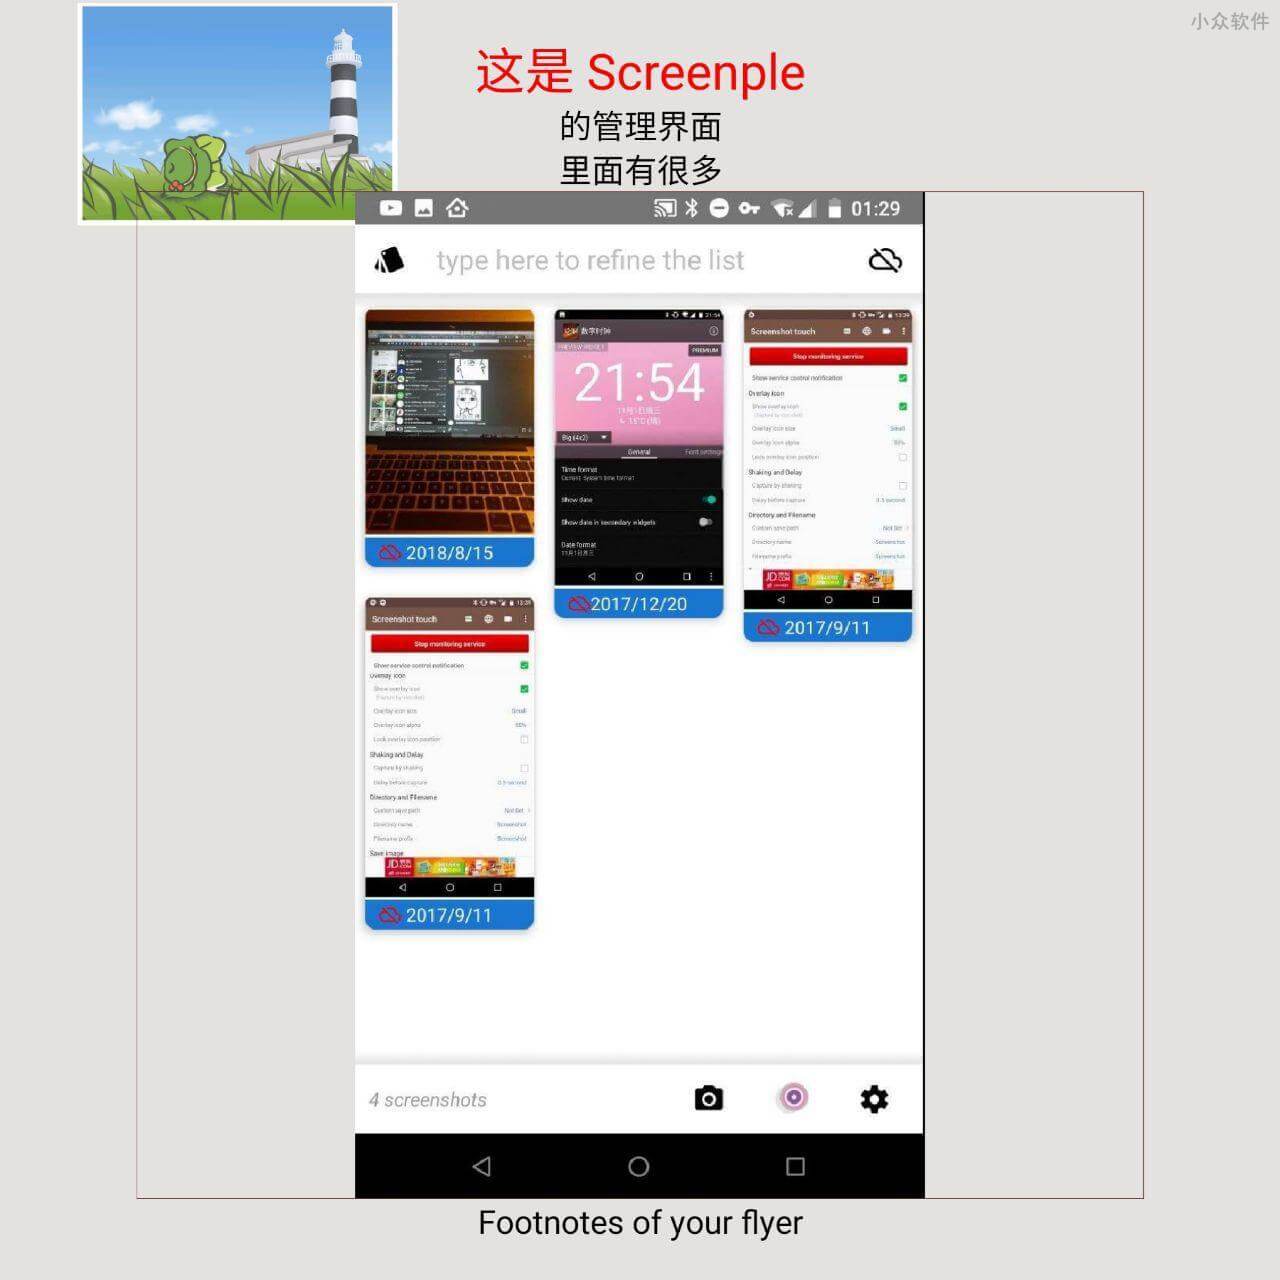 Screenple - Android 截图新选择，智能选区、截图管理、提醒等功能 4